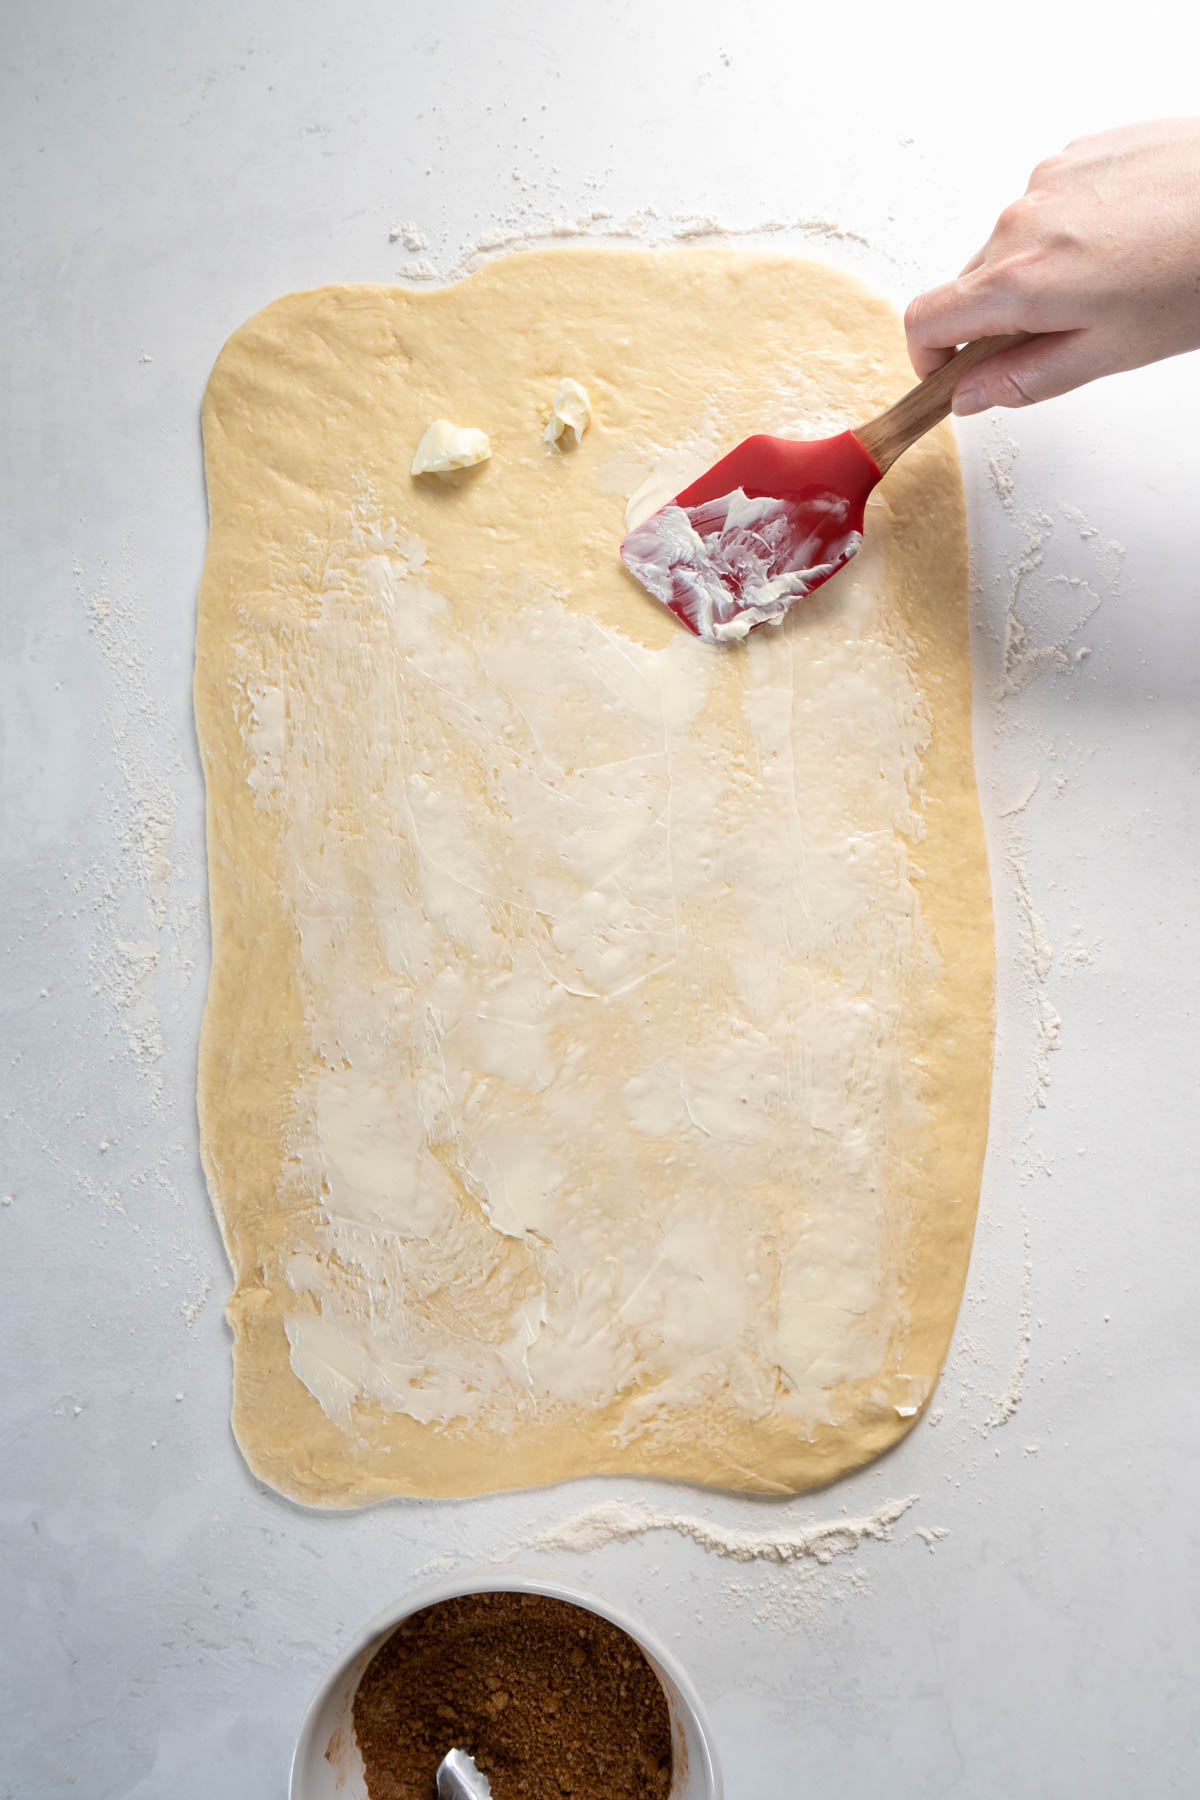 Spreading butter on rolled out dough rectangle.